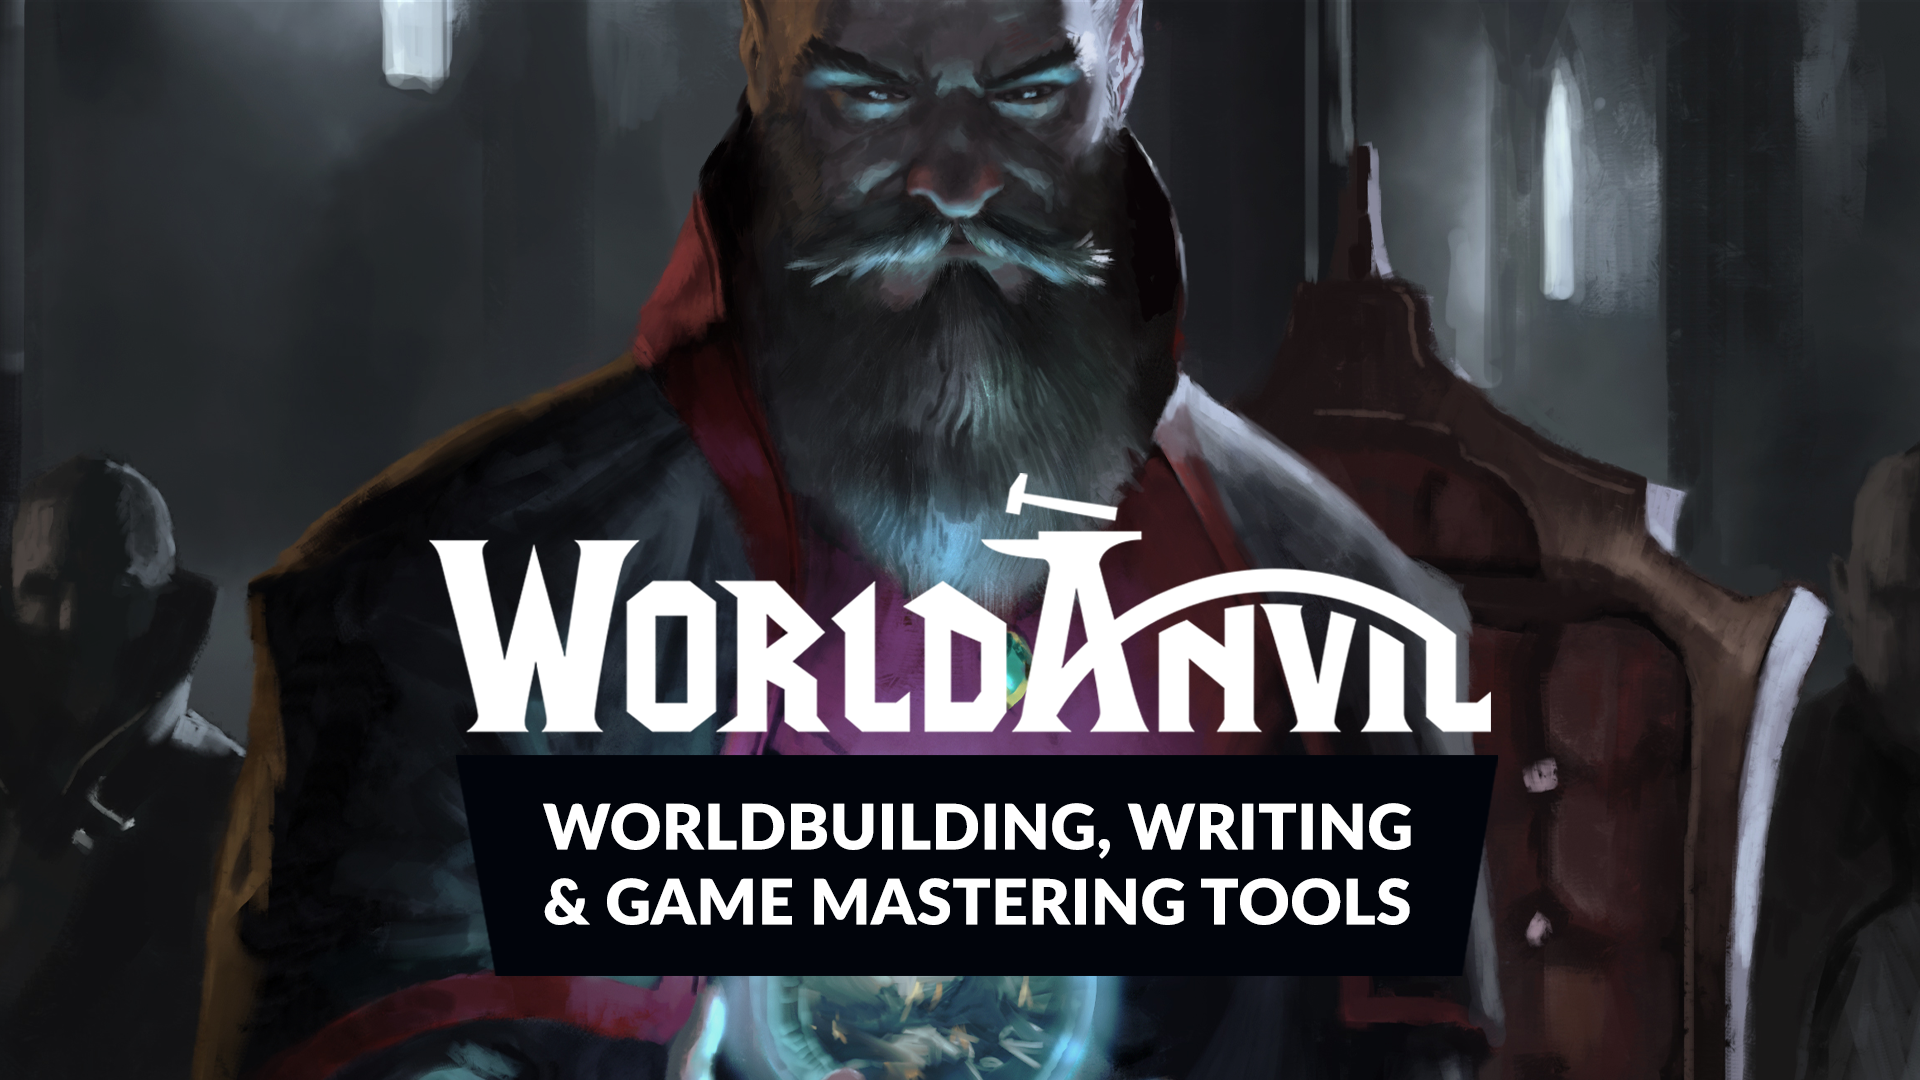 Worldbuilding and RPG Campaign Management | World Anvil